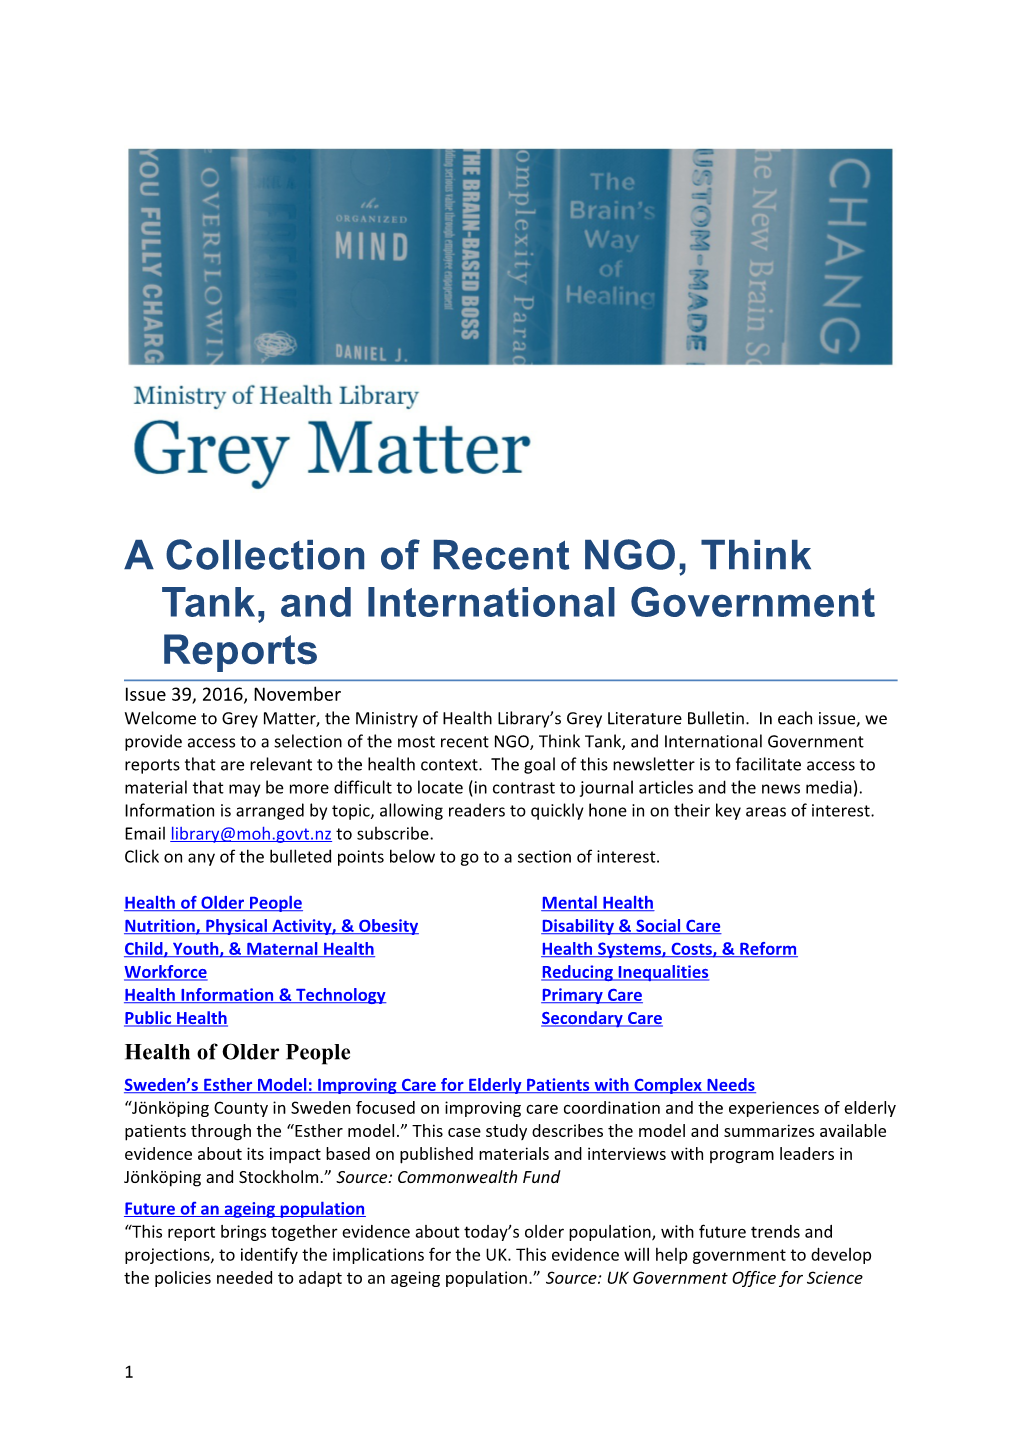 A Collection of Recent NGO, Think Tank, and International Government Reports